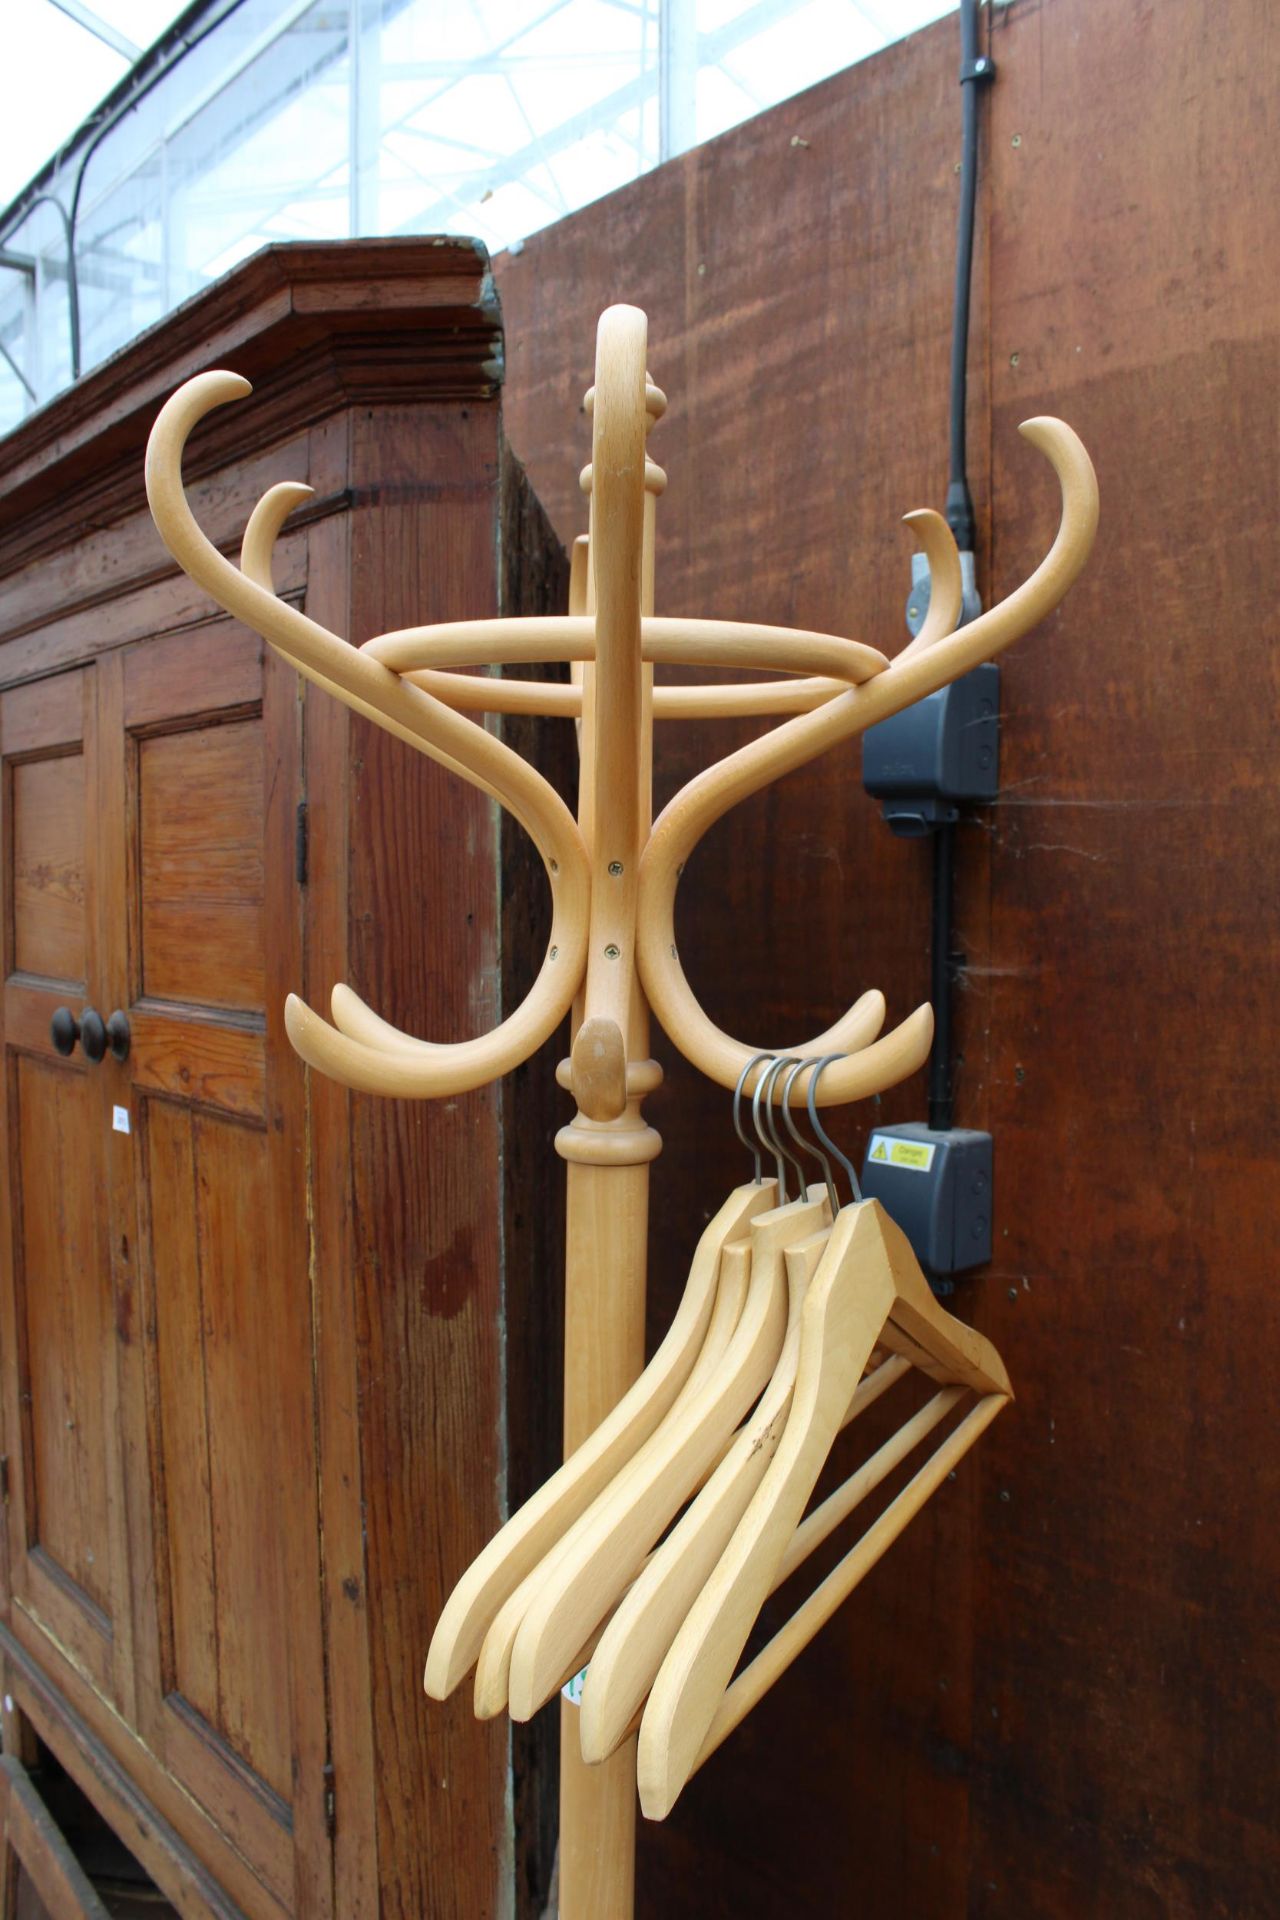 A BENTWOOD COAT/STICK STAND AND FIVE WOODEN HANGERS - Image 2 of 3